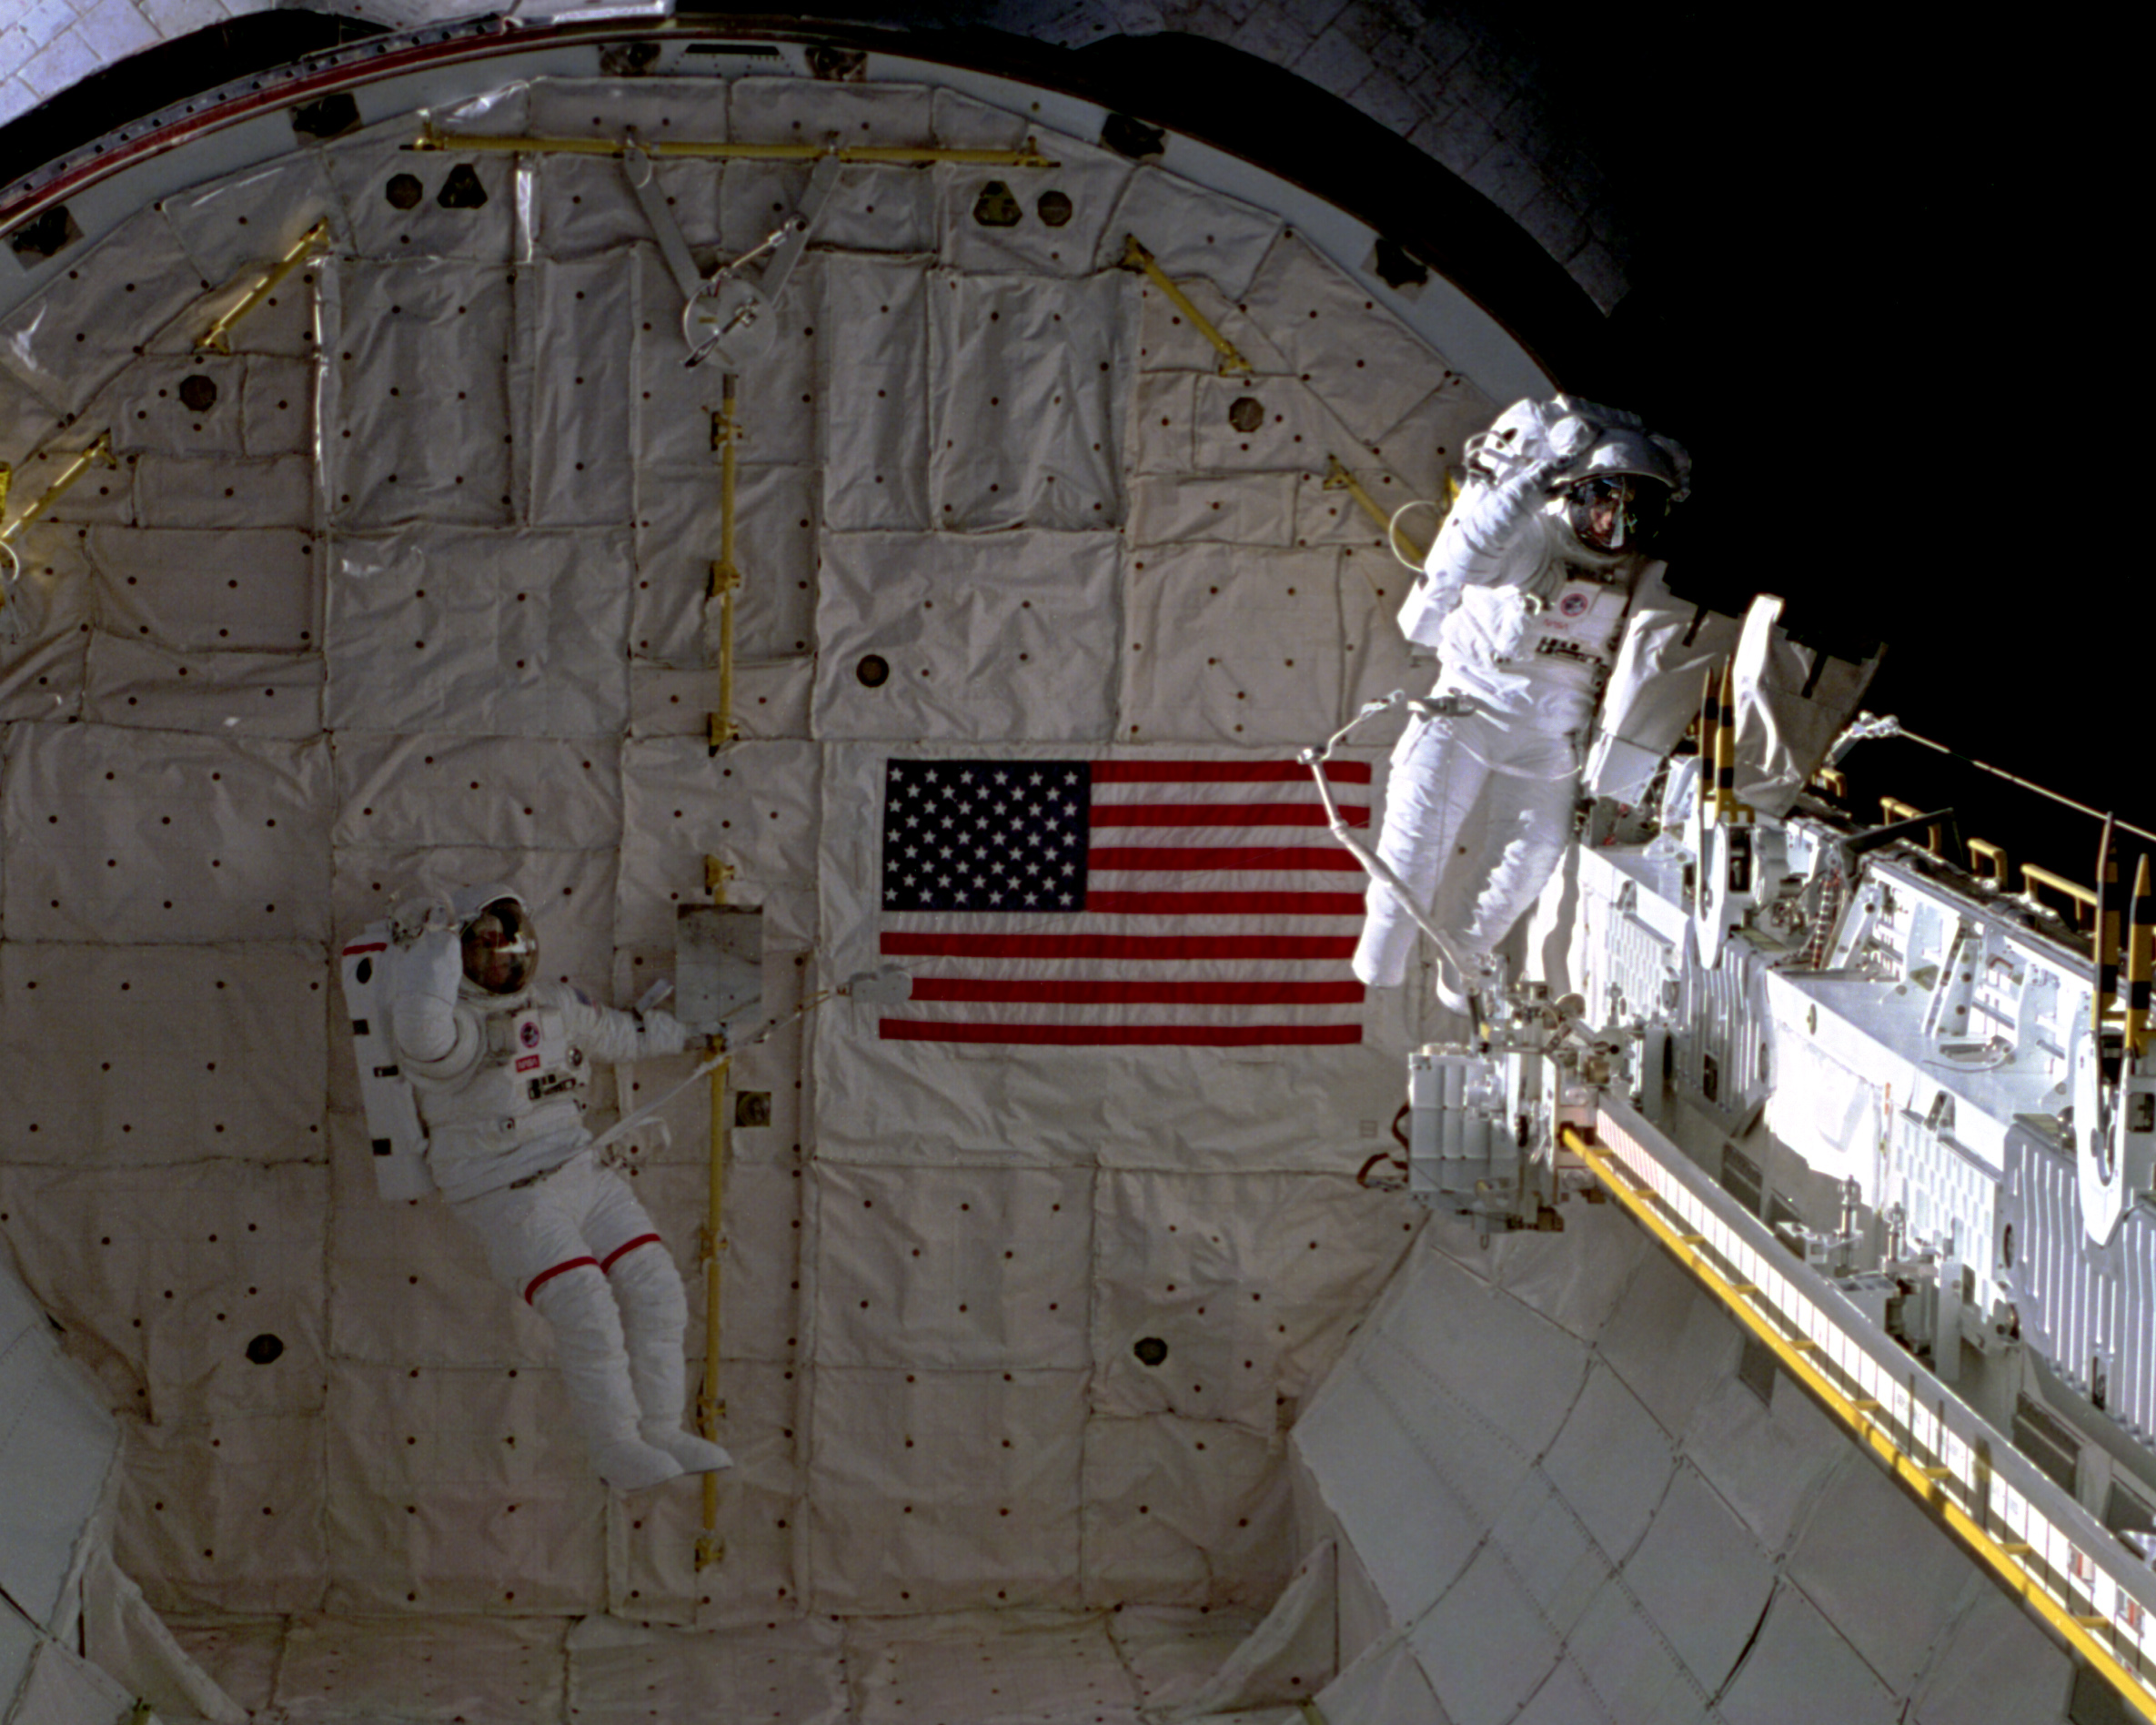 Jerry Ross and Jay Apt on the second EVA of STS-37, one of the images he can show as an astronaut speaker.